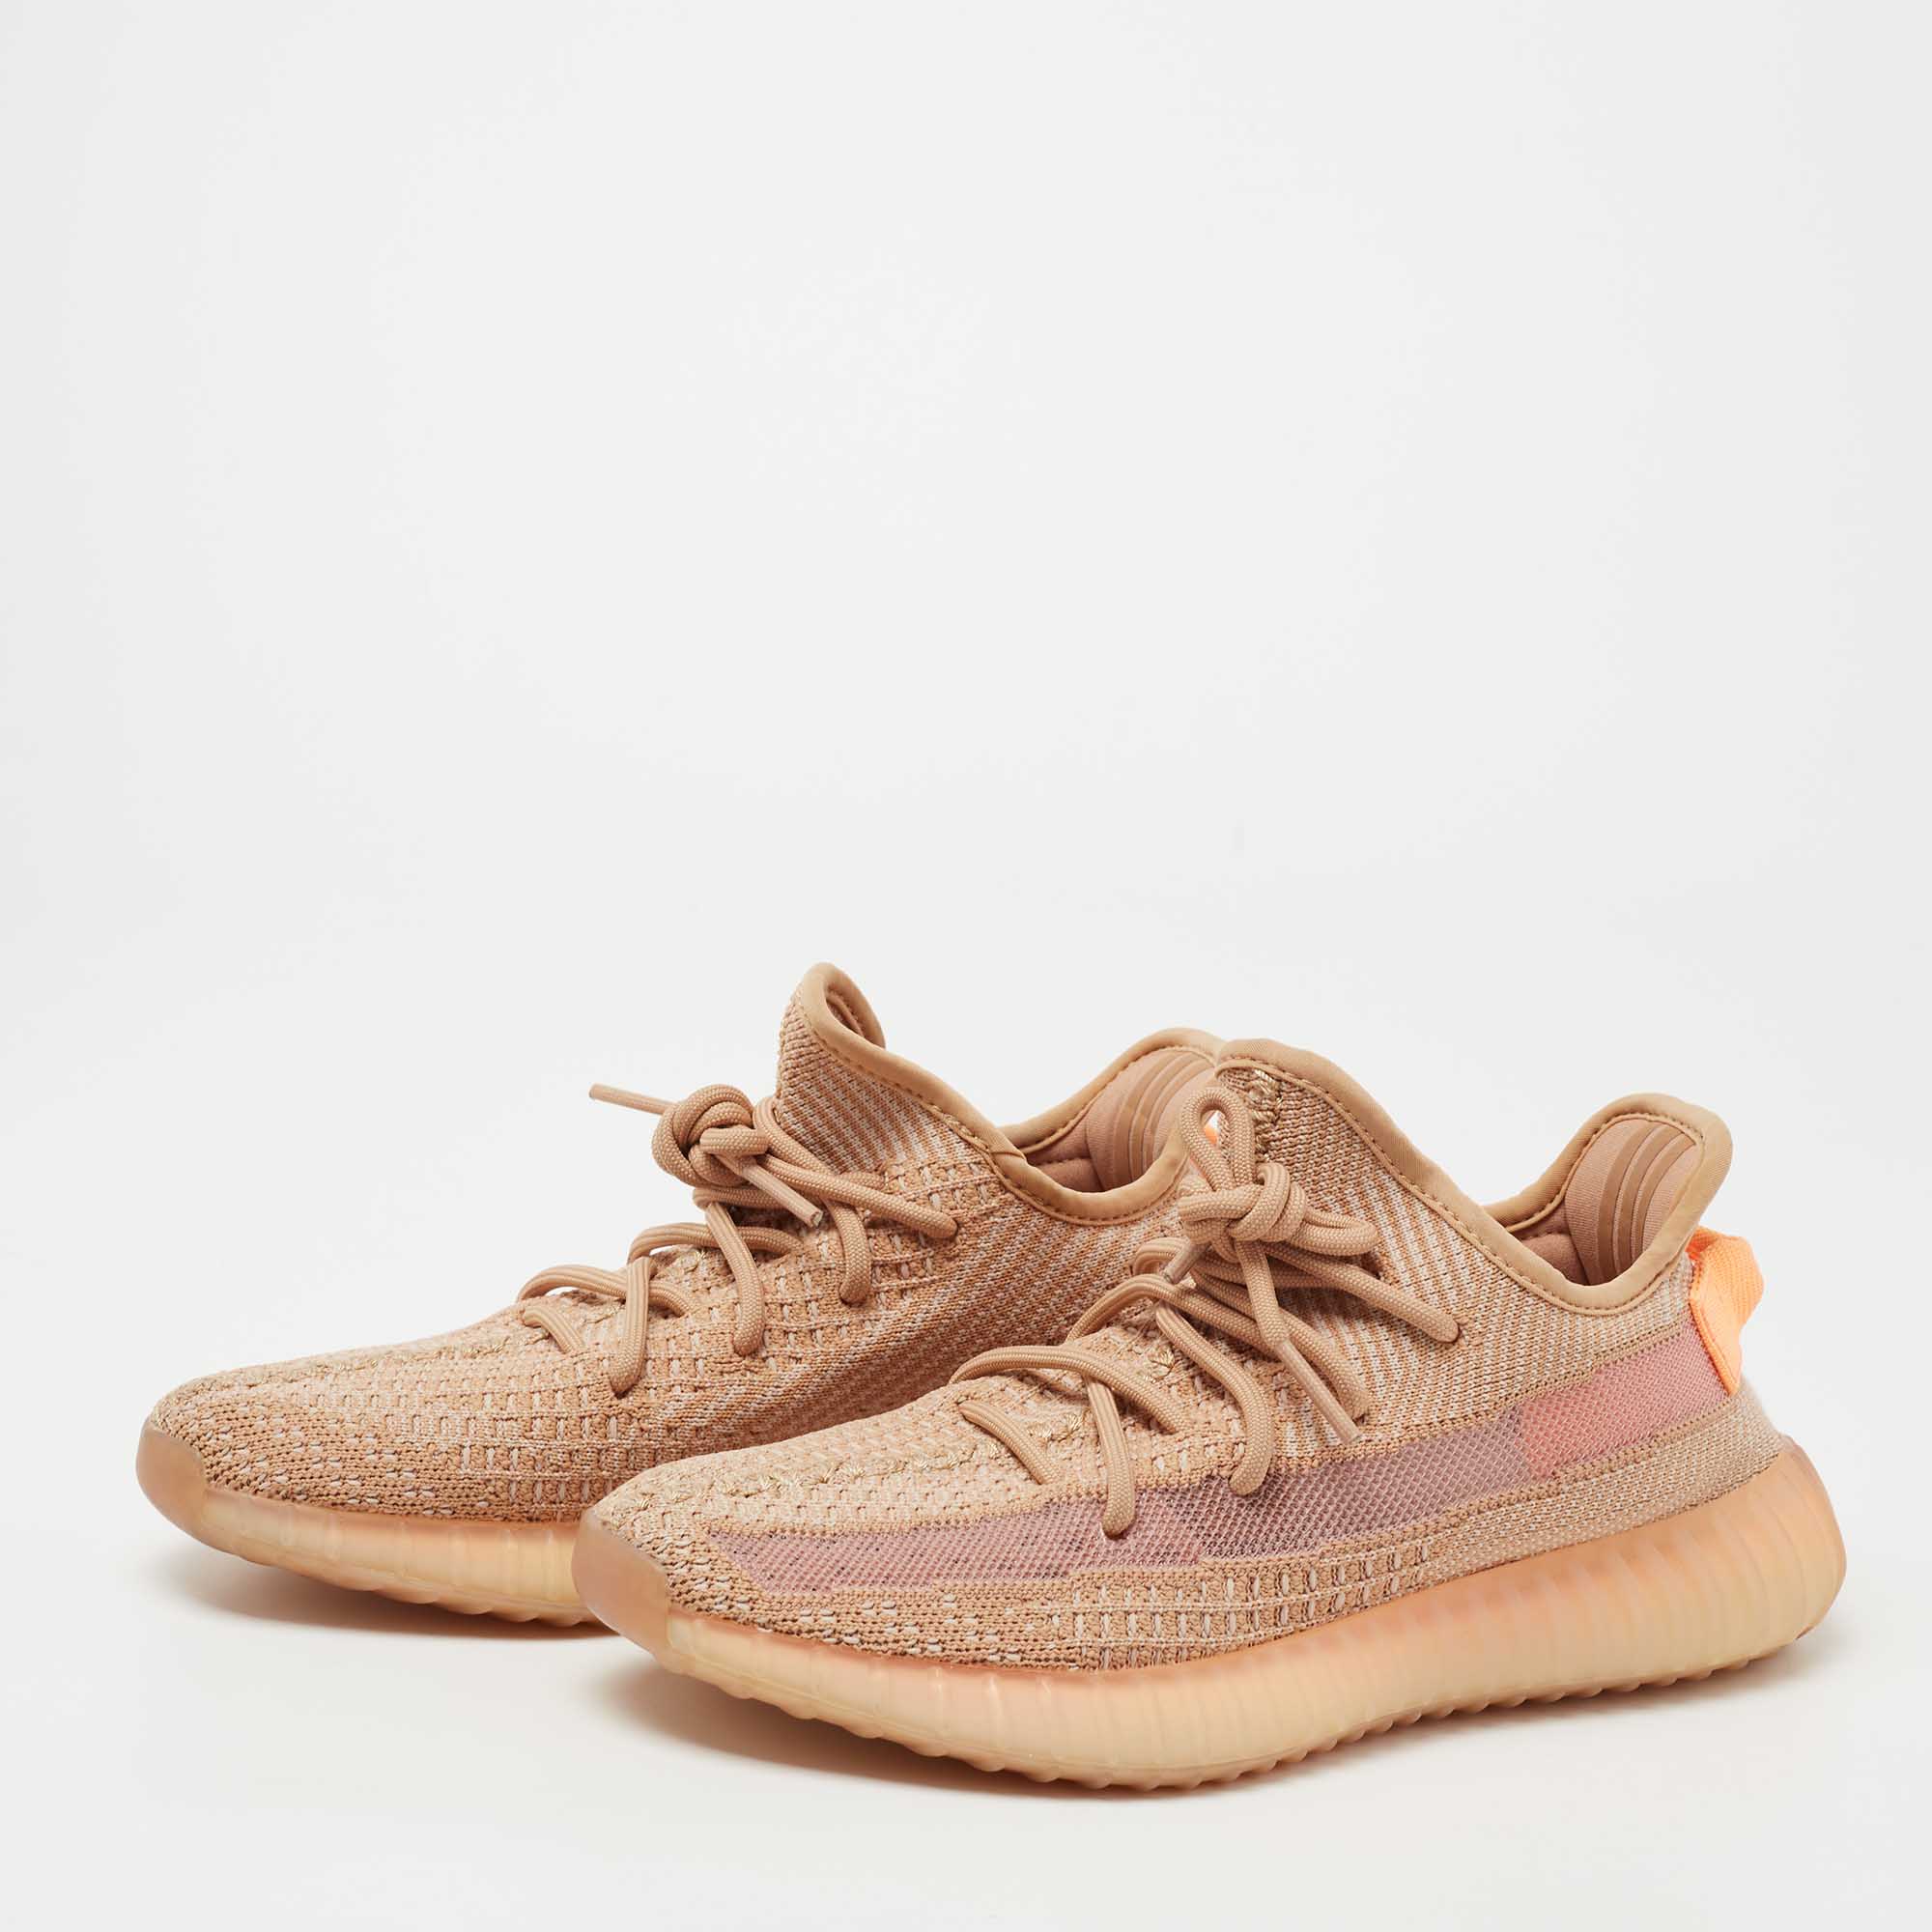 

Yeezy x Adidas Light Orange Knit Fabric Boost 350 V2 Clay Low-Top Sneakers Size  1/3